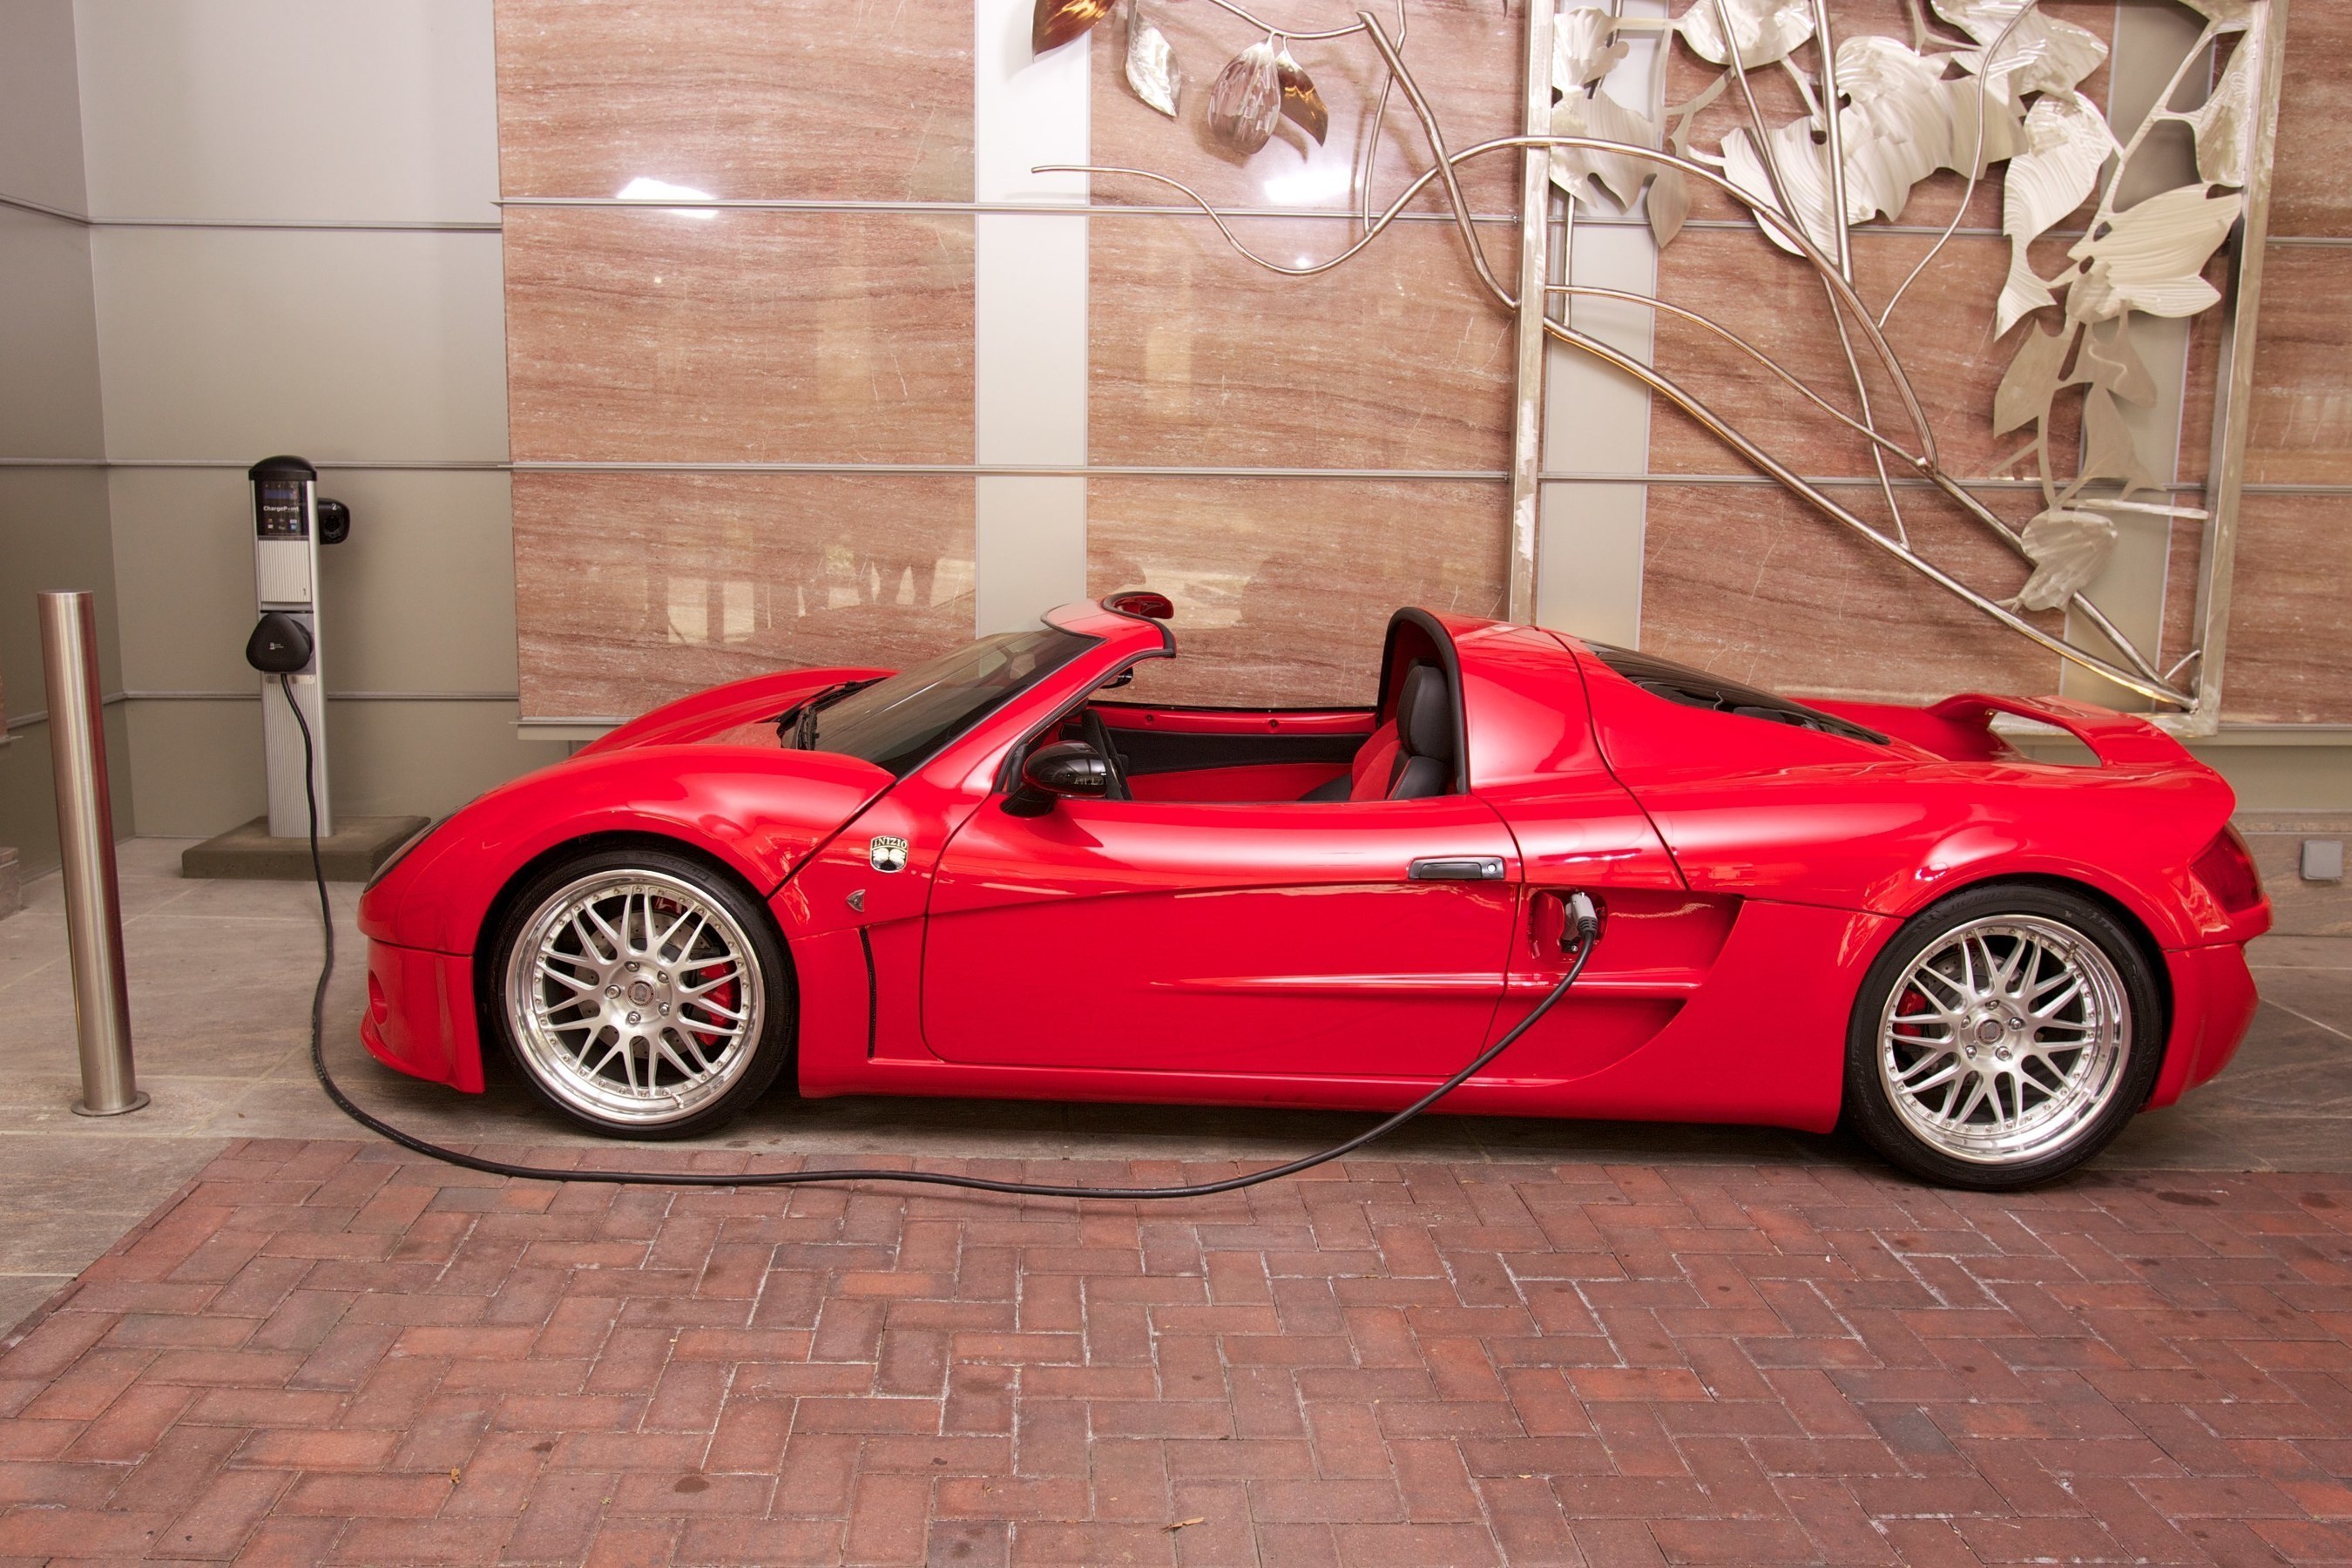 The Ritz-Carlton Encourages Sustainable Driving With New Electric Charging Stations At Hotels Across The World